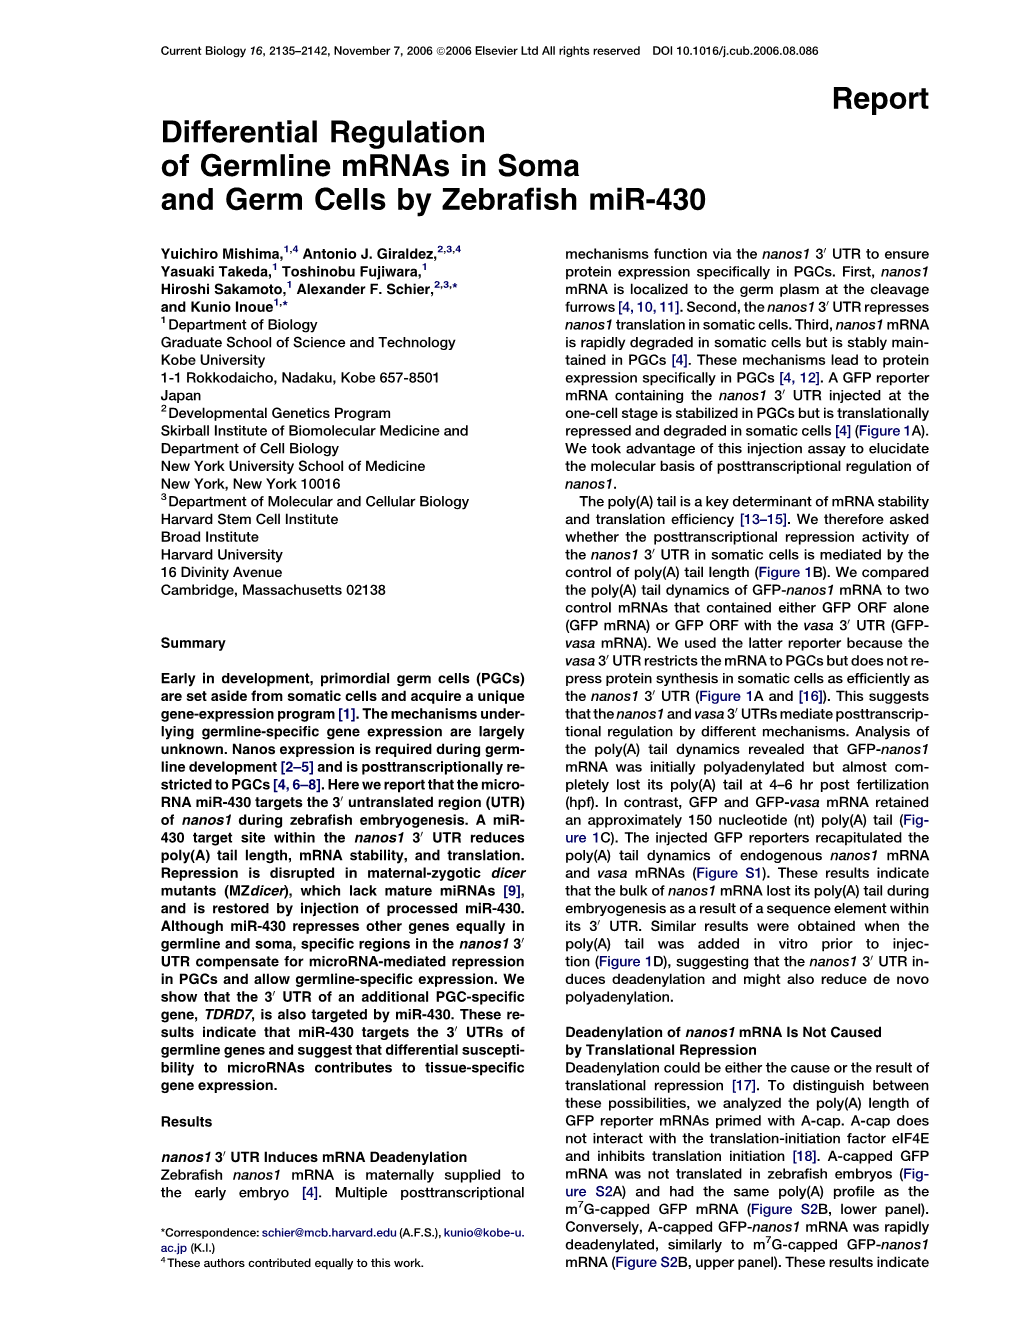 Report Differential Regulation of Germline Mrnas in Soma and Germ Cells by Zebraﬁsh Mir-430